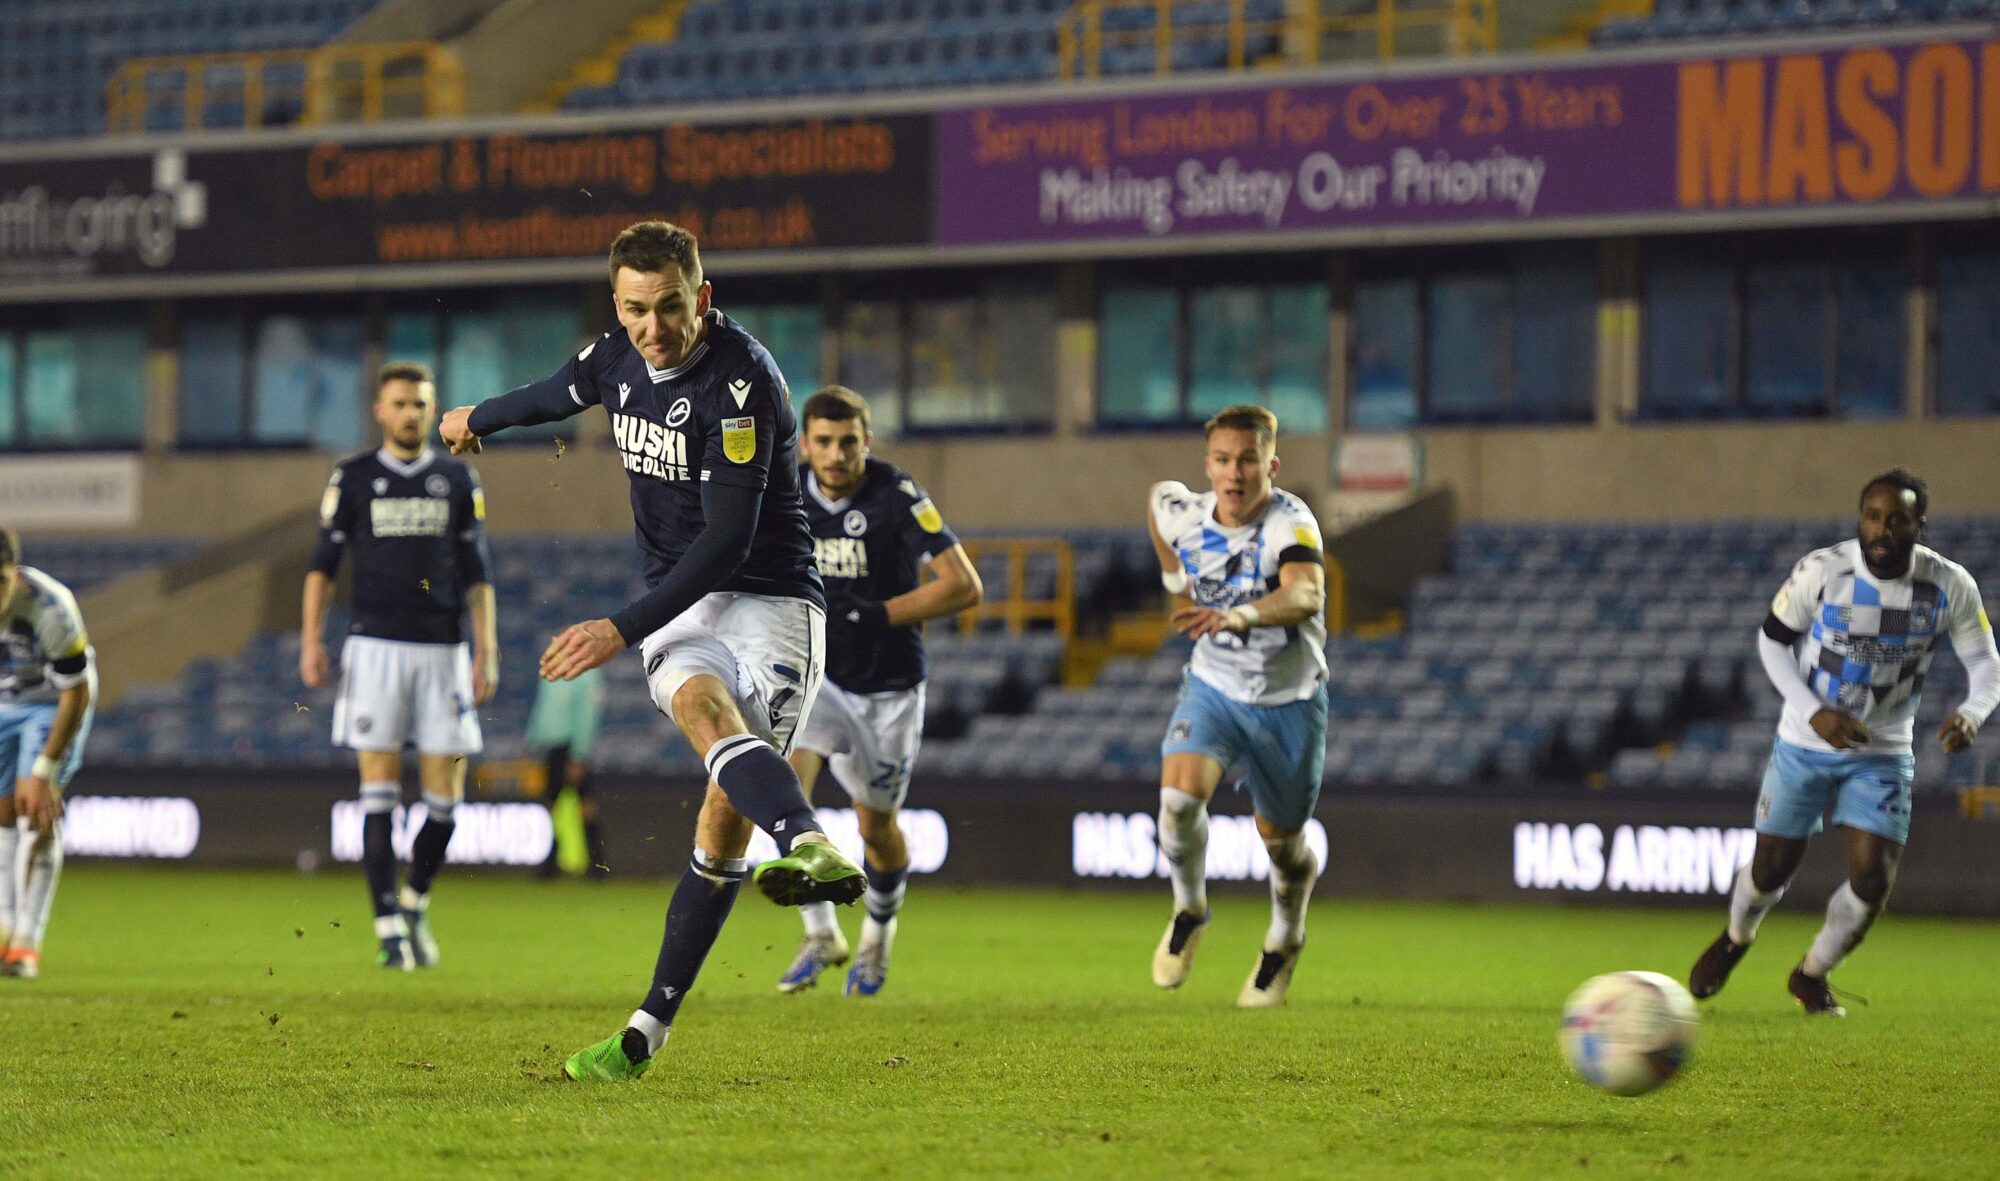 Millwall 3-2 Coventry: Lions stun 10-man Sky Blues with comeback win, Football News